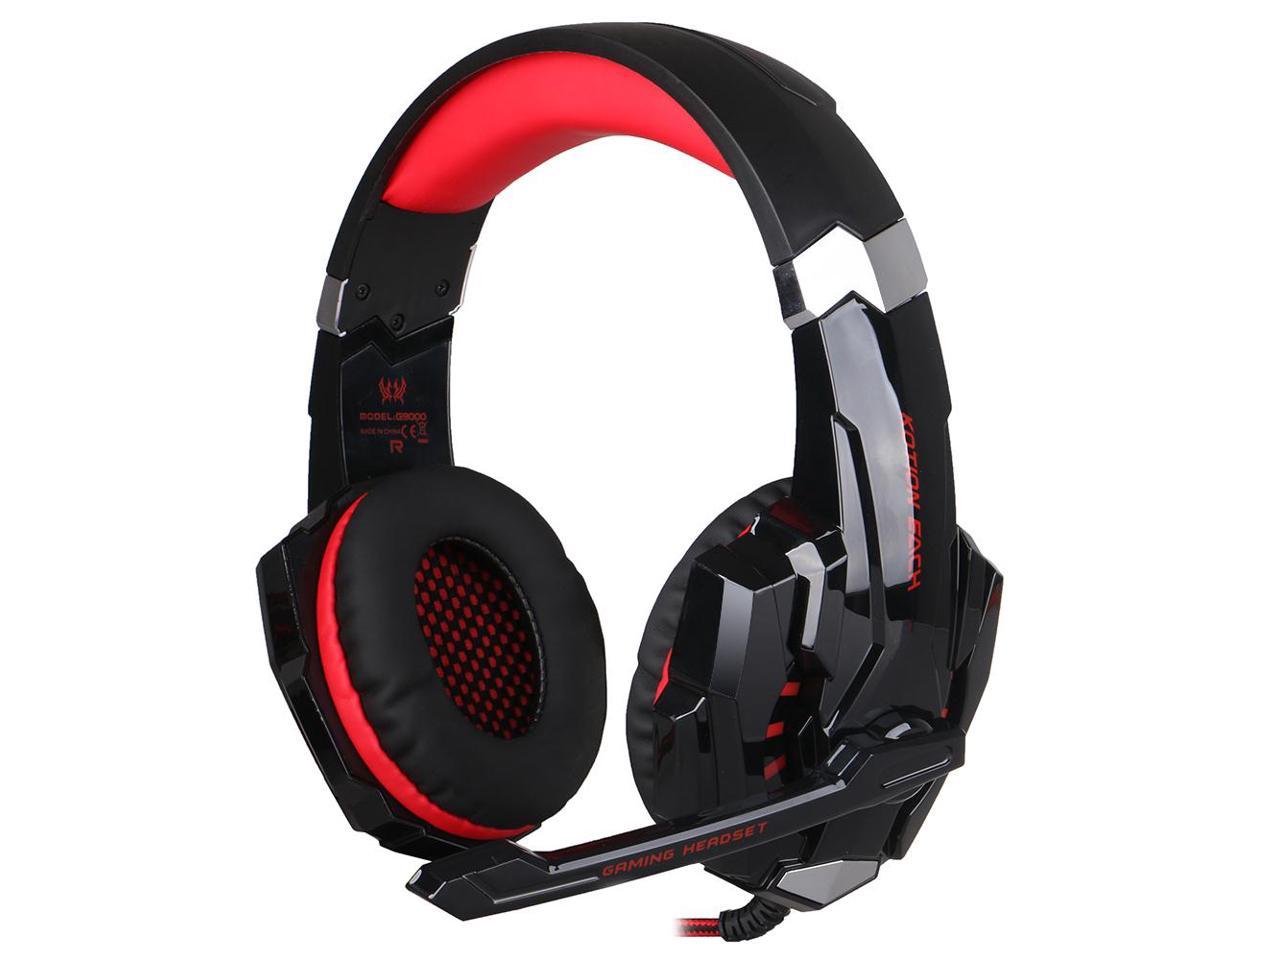 KOTION EACH G9000 USB Wired Led Gaming Headphones with Mic Auriculares Game Stereo Headset